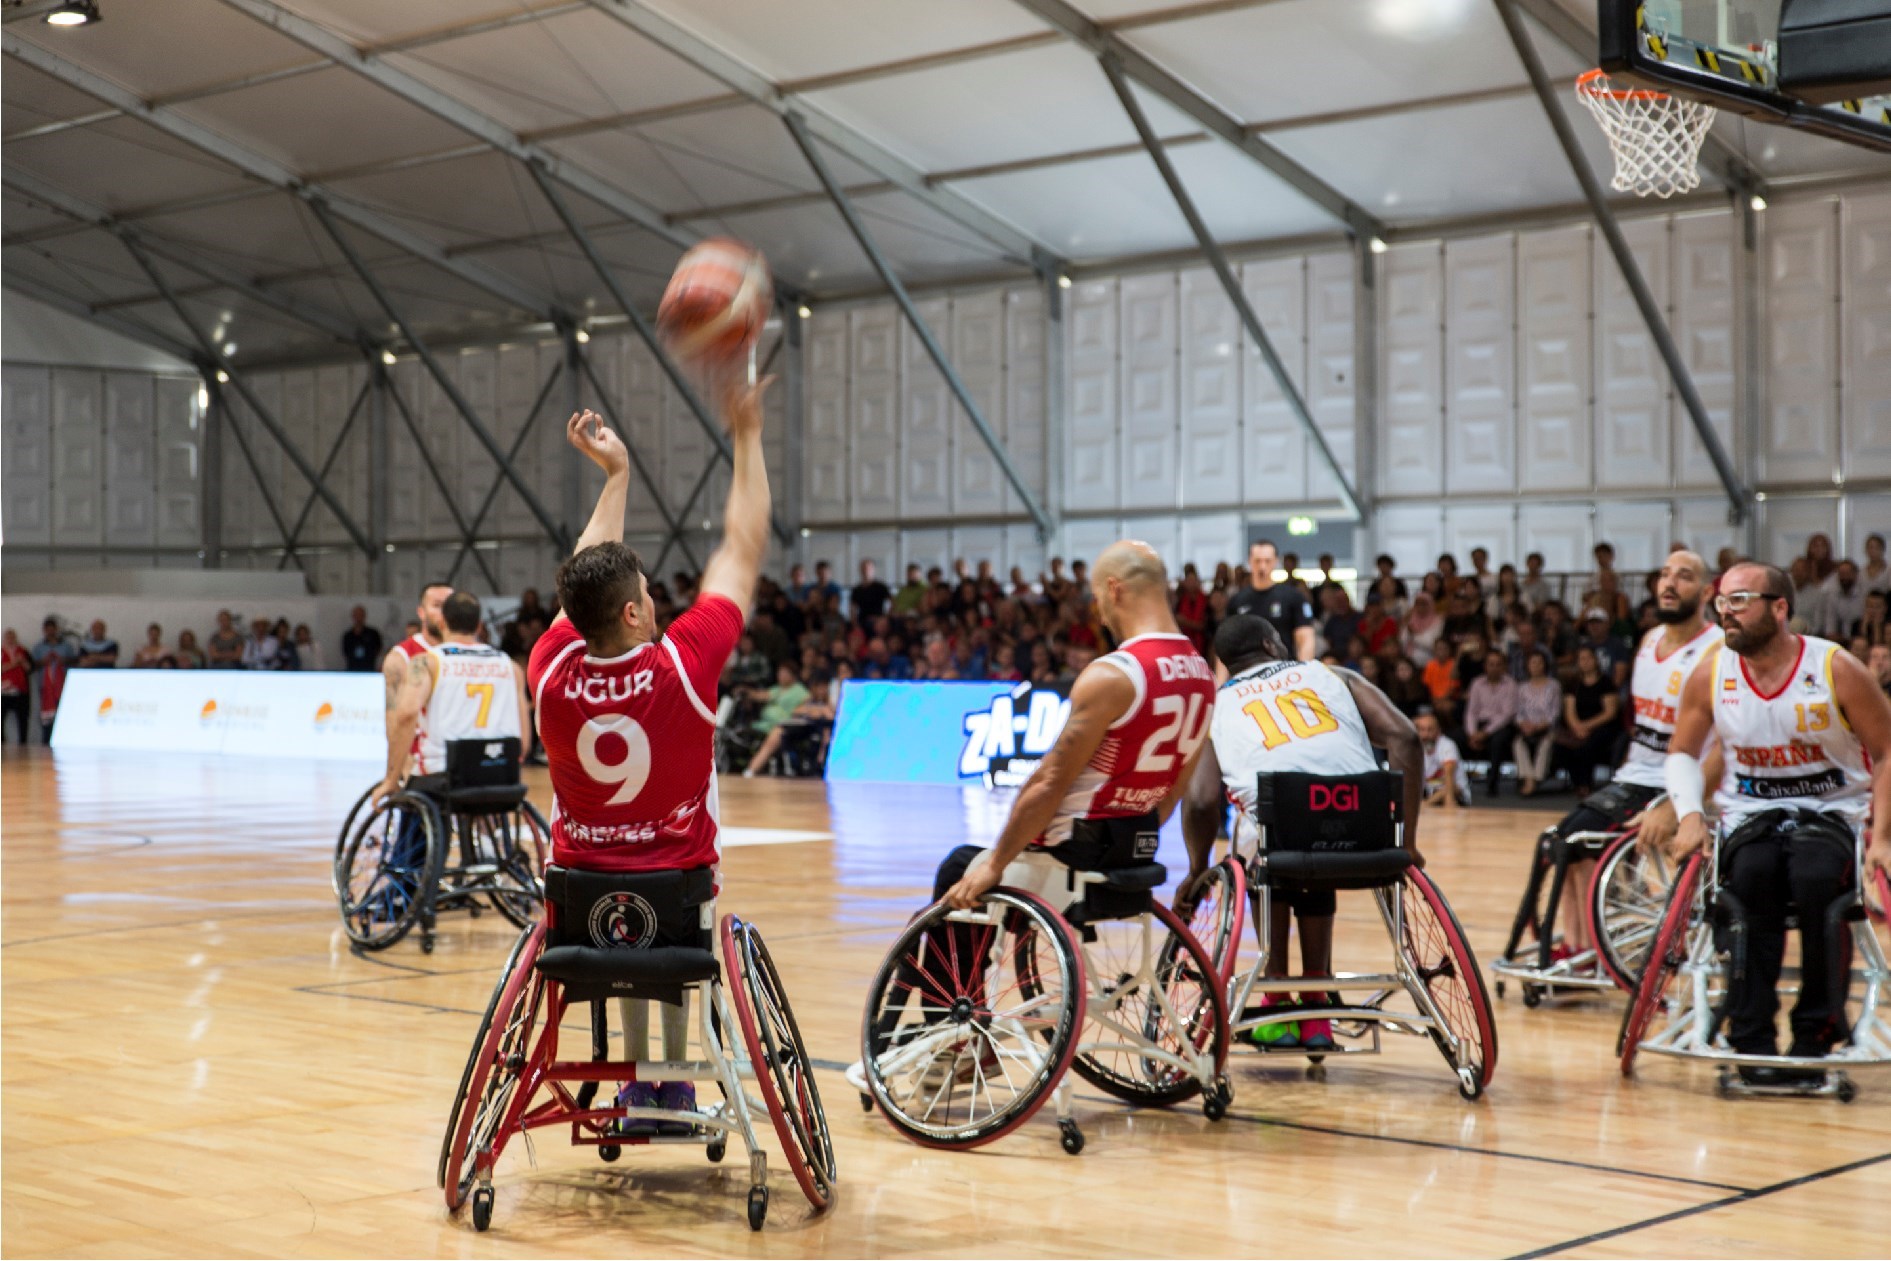 2018 Wheelchair Basketball World Championship 2018 in action